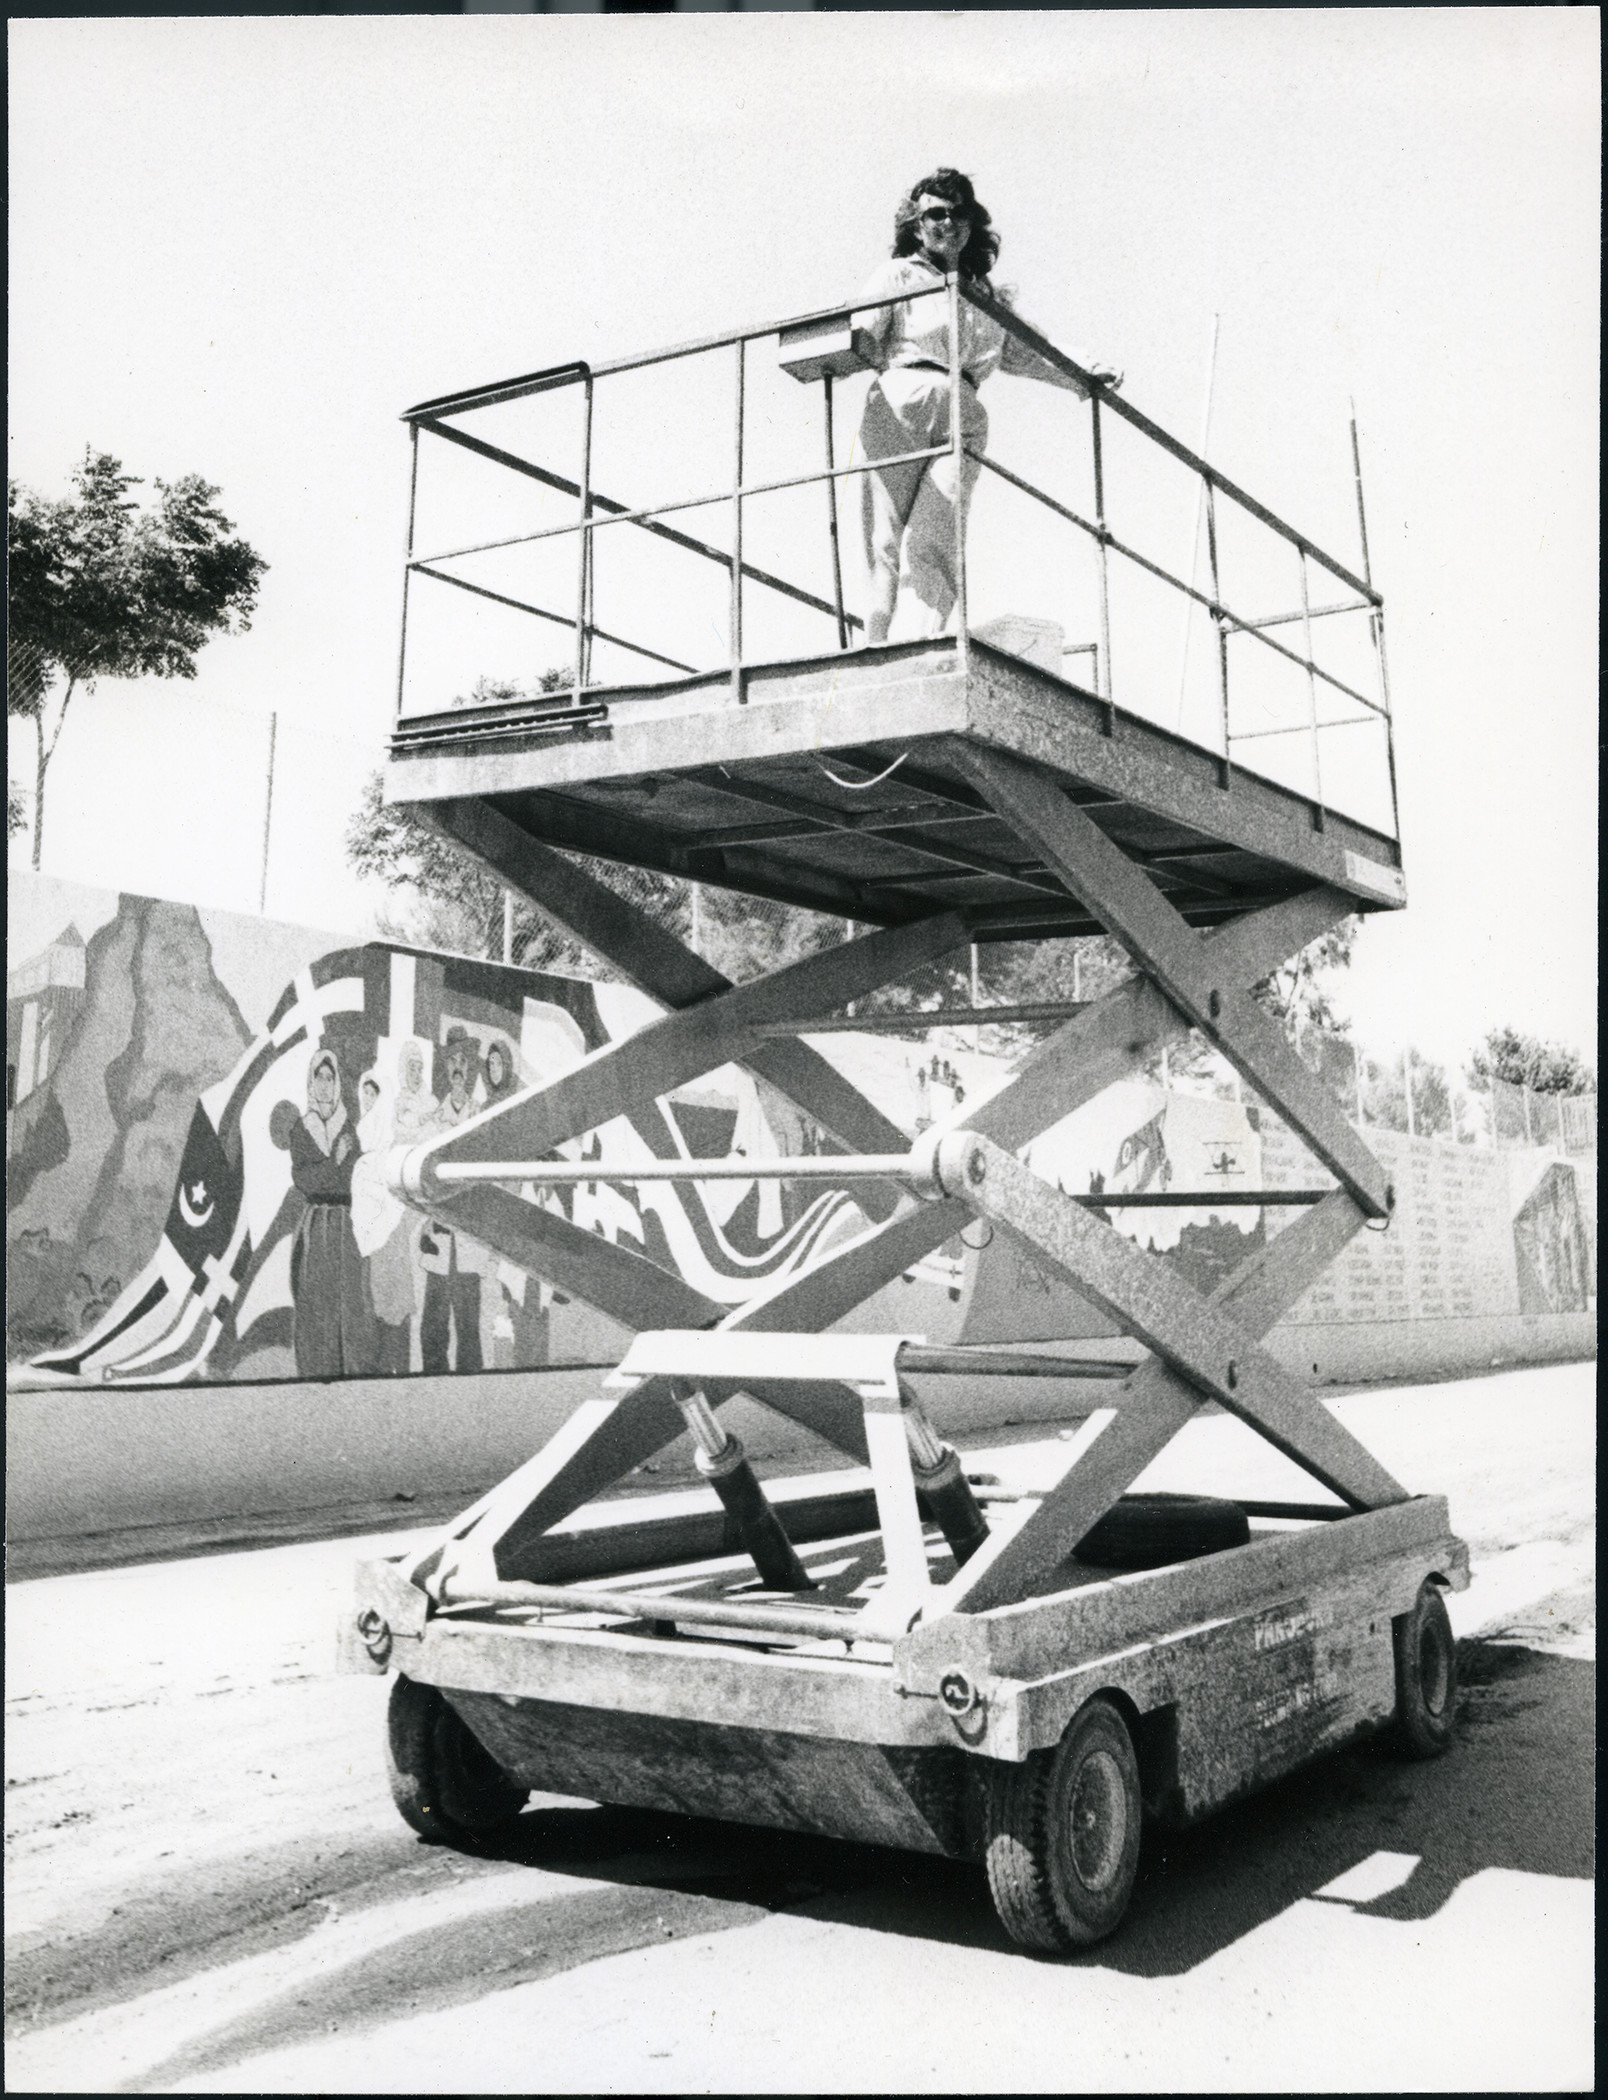  Judy Baca on a scissor lift,&nbsp;© SPARC 1983, courtesy of Judith F. Baca and the SPARC archives. Photo: Linda Eber, 1983.&nbsp; 